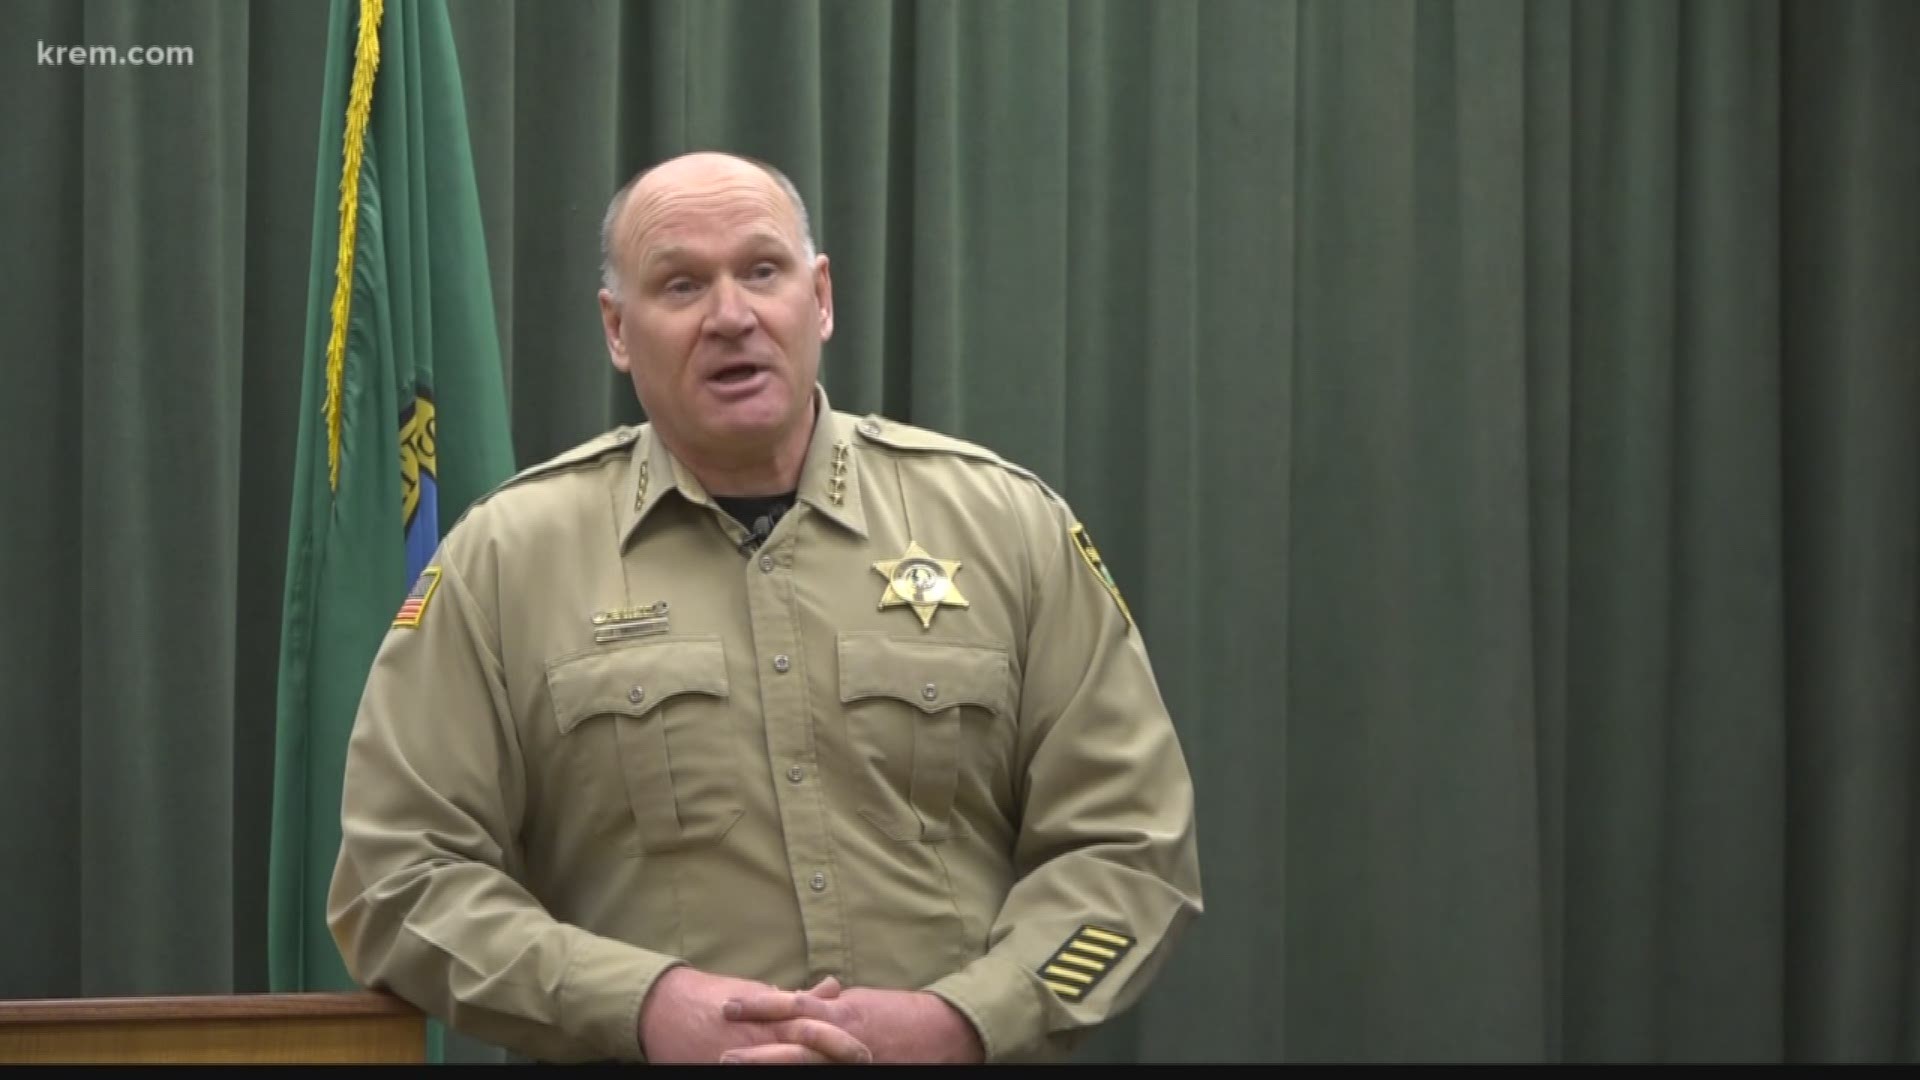 Spokane Co. Sheriff Ozzie Knezovich said he will not seek re-election at the end of his term, as he wants to pursue a master's degree. He took office in 2006.